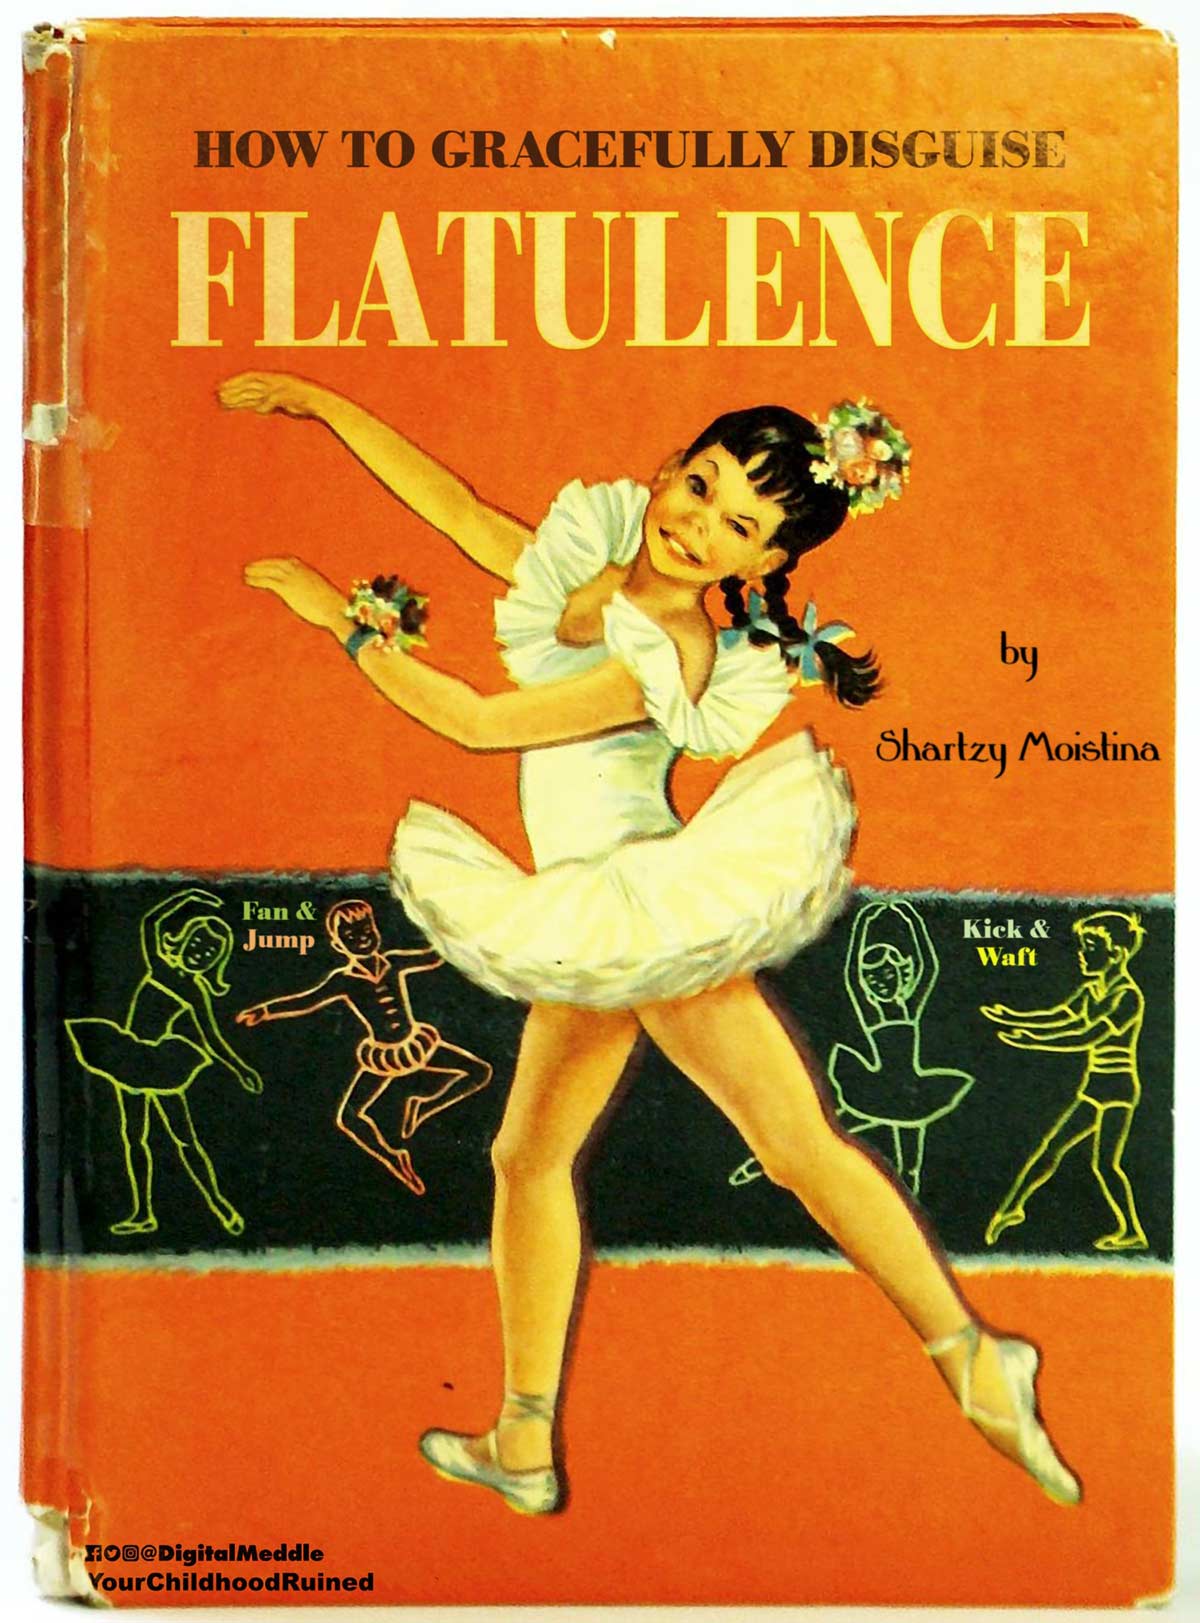 How to gracefully disguise flatulence